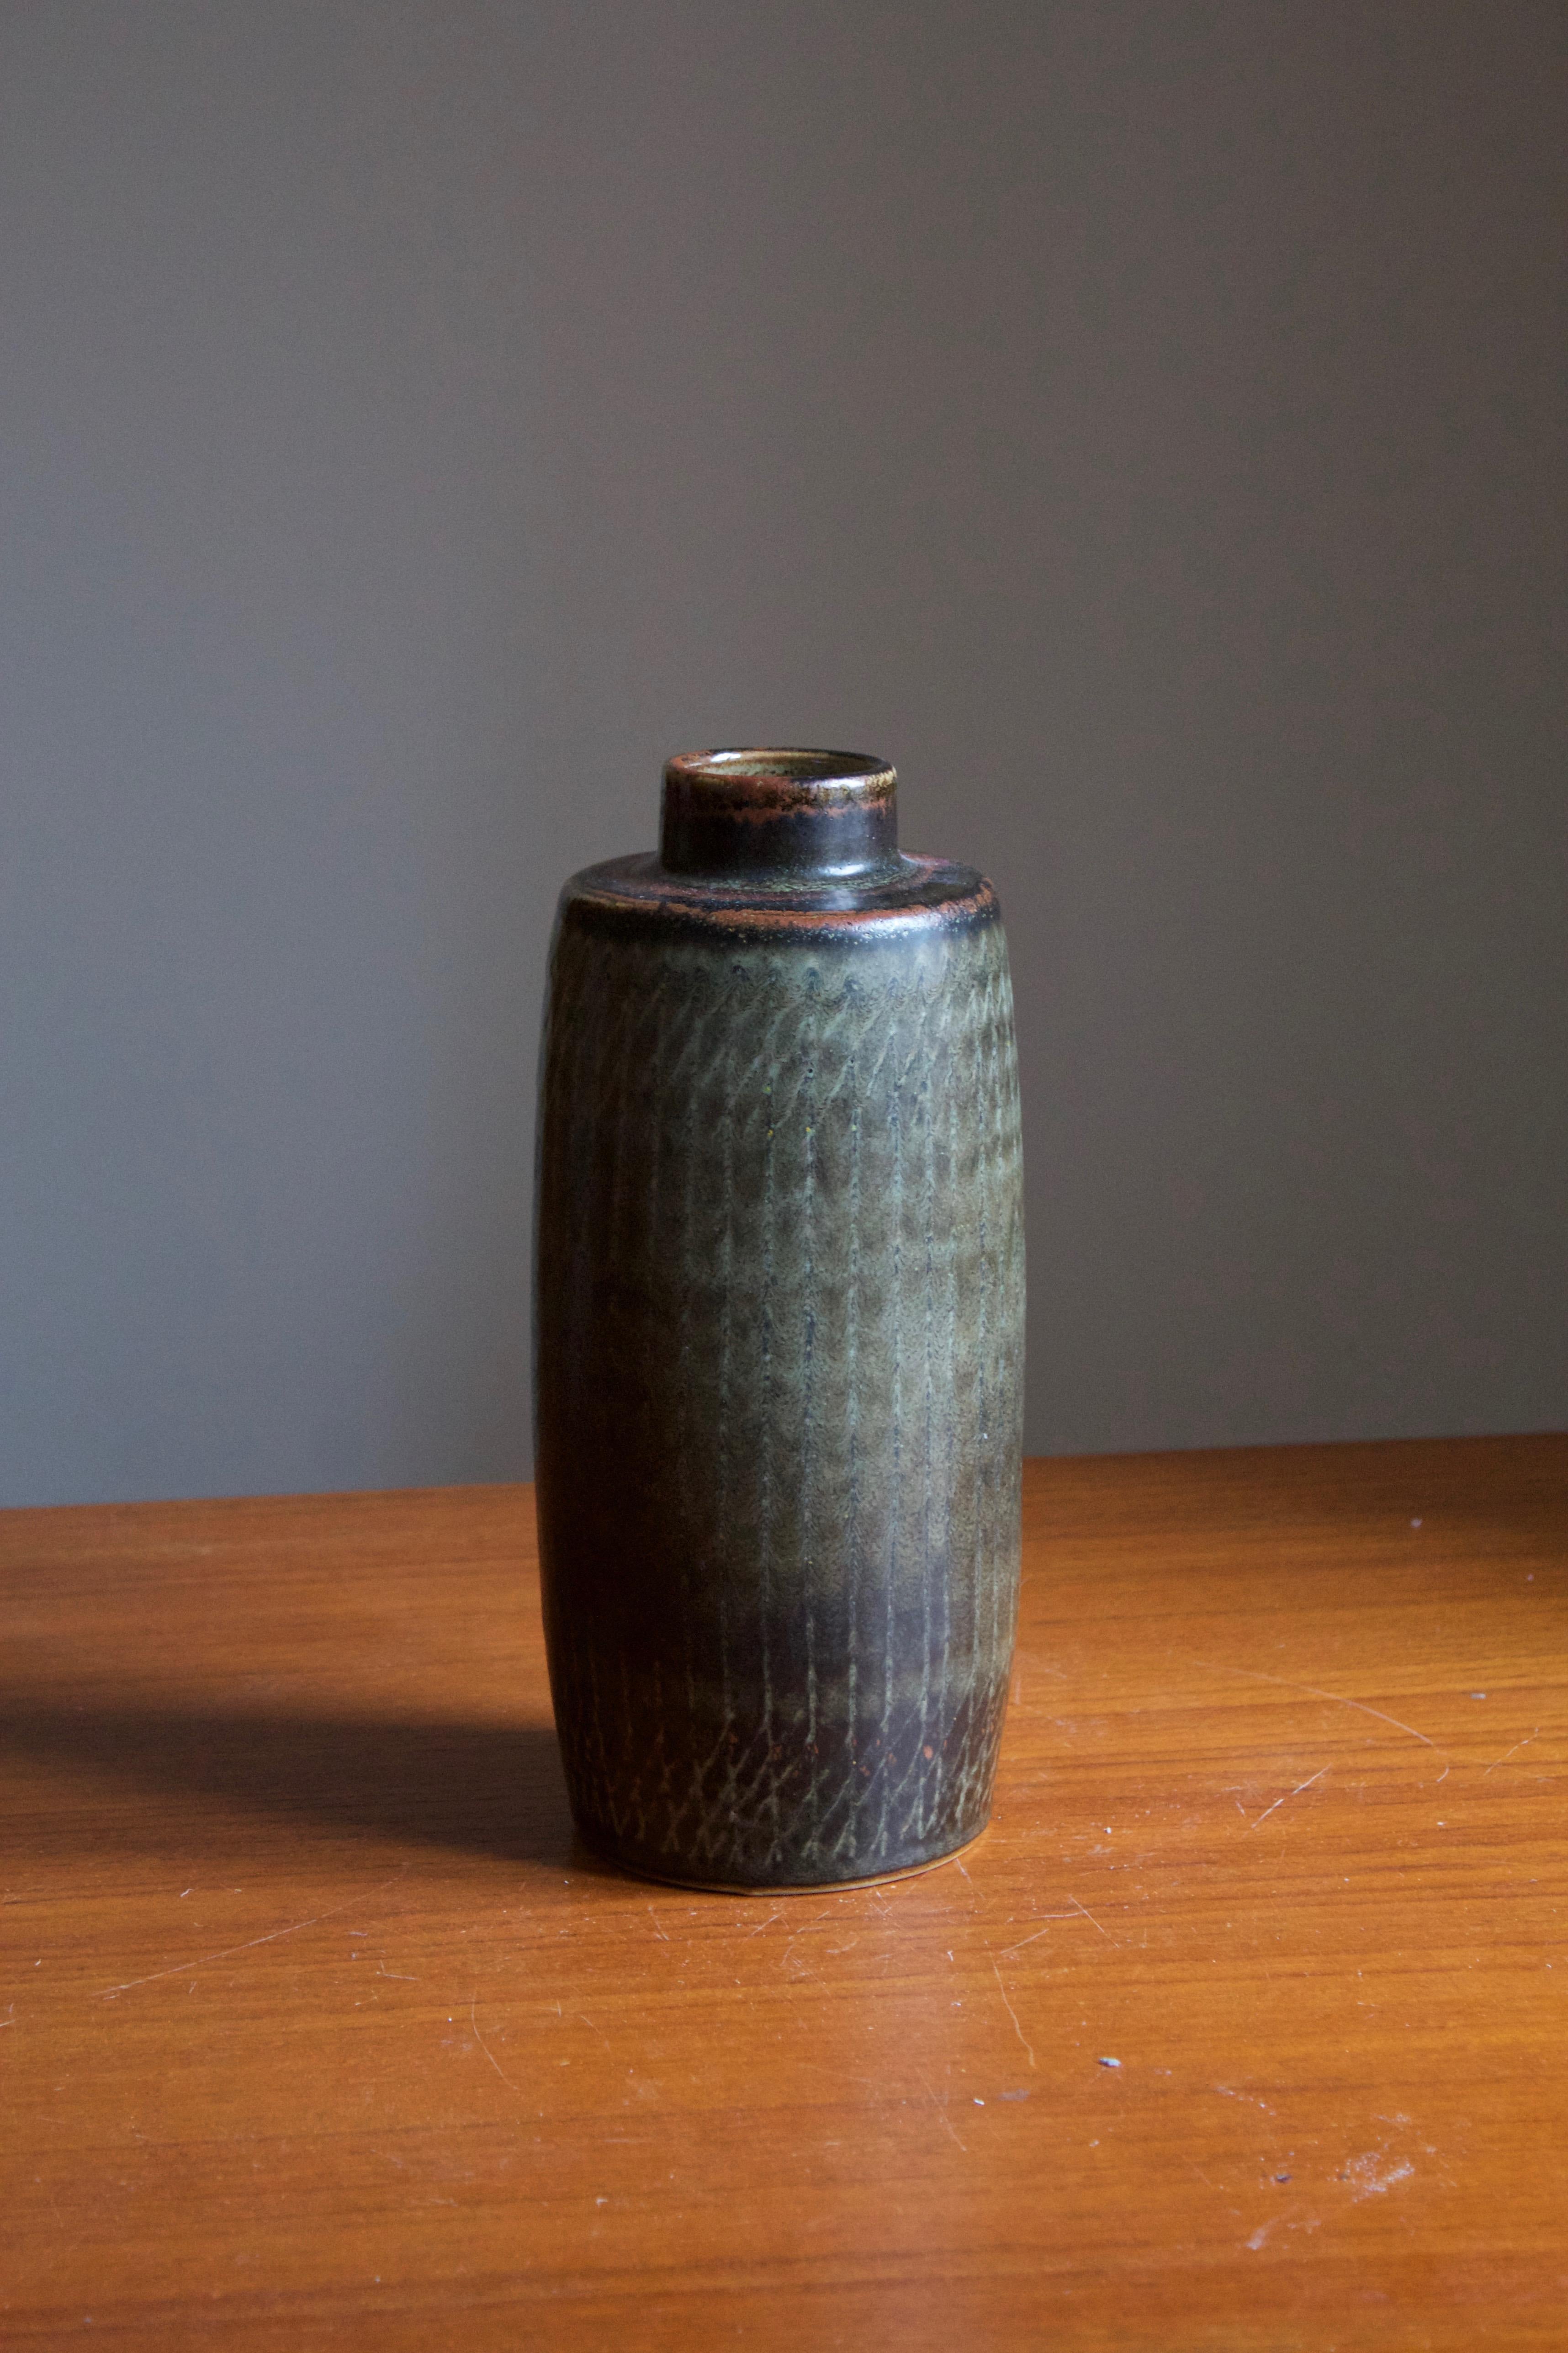 A rare sizable stoneware vase or vessel designed by Carl-Harry Stålhane produced by Rörstrand, signed, likely produced 1960s. From the rare production series at Rörstands named 